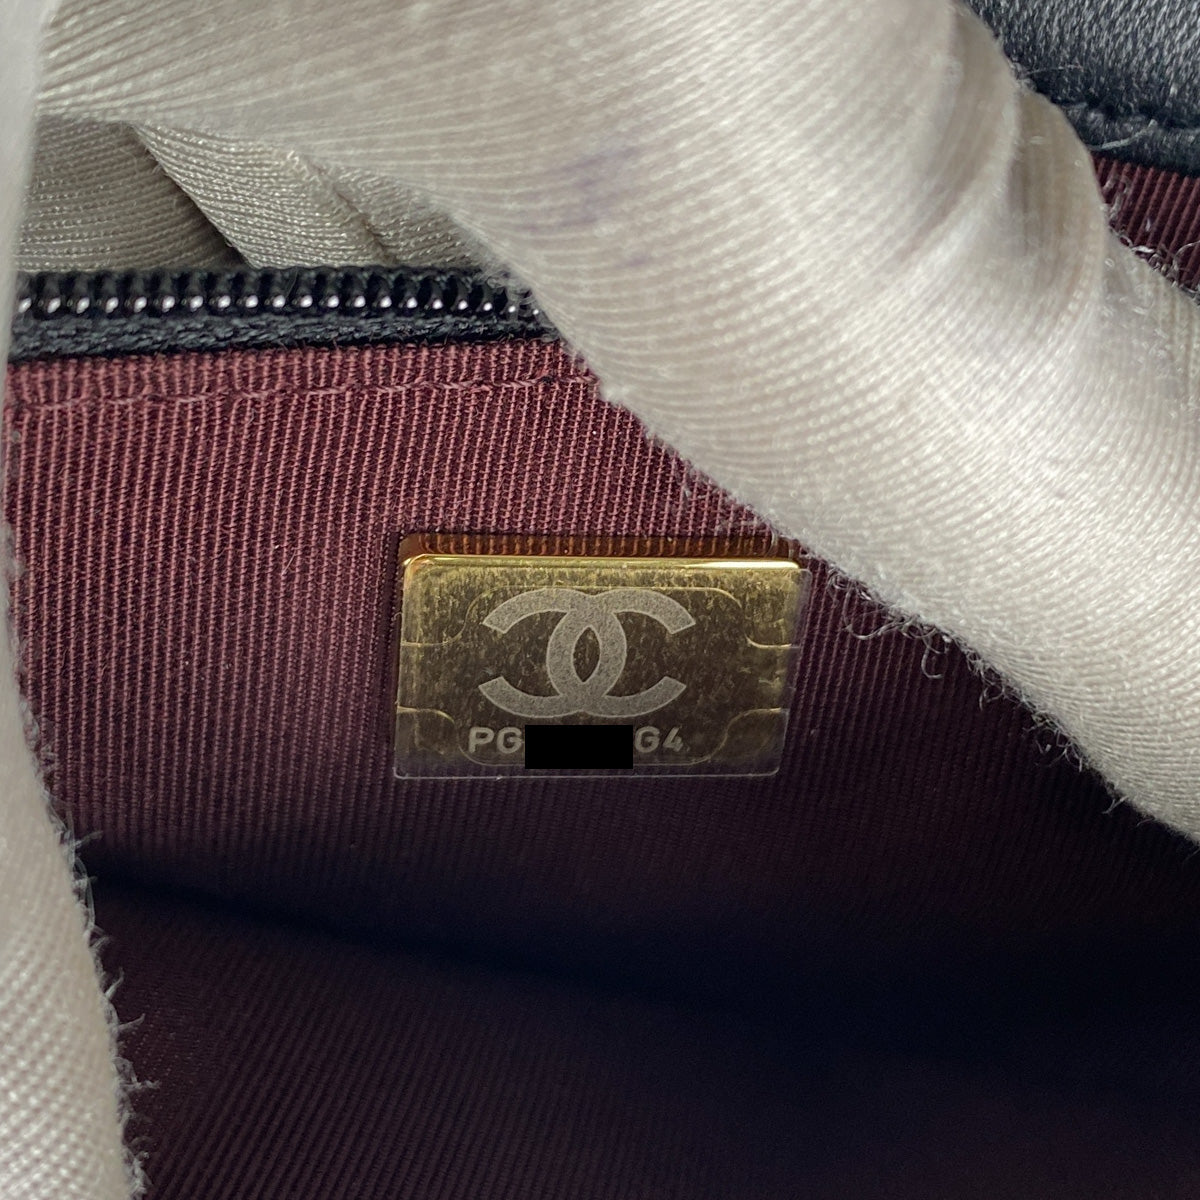 Chanel Serial Number Meaning and Sticker Guide  Lollipuff